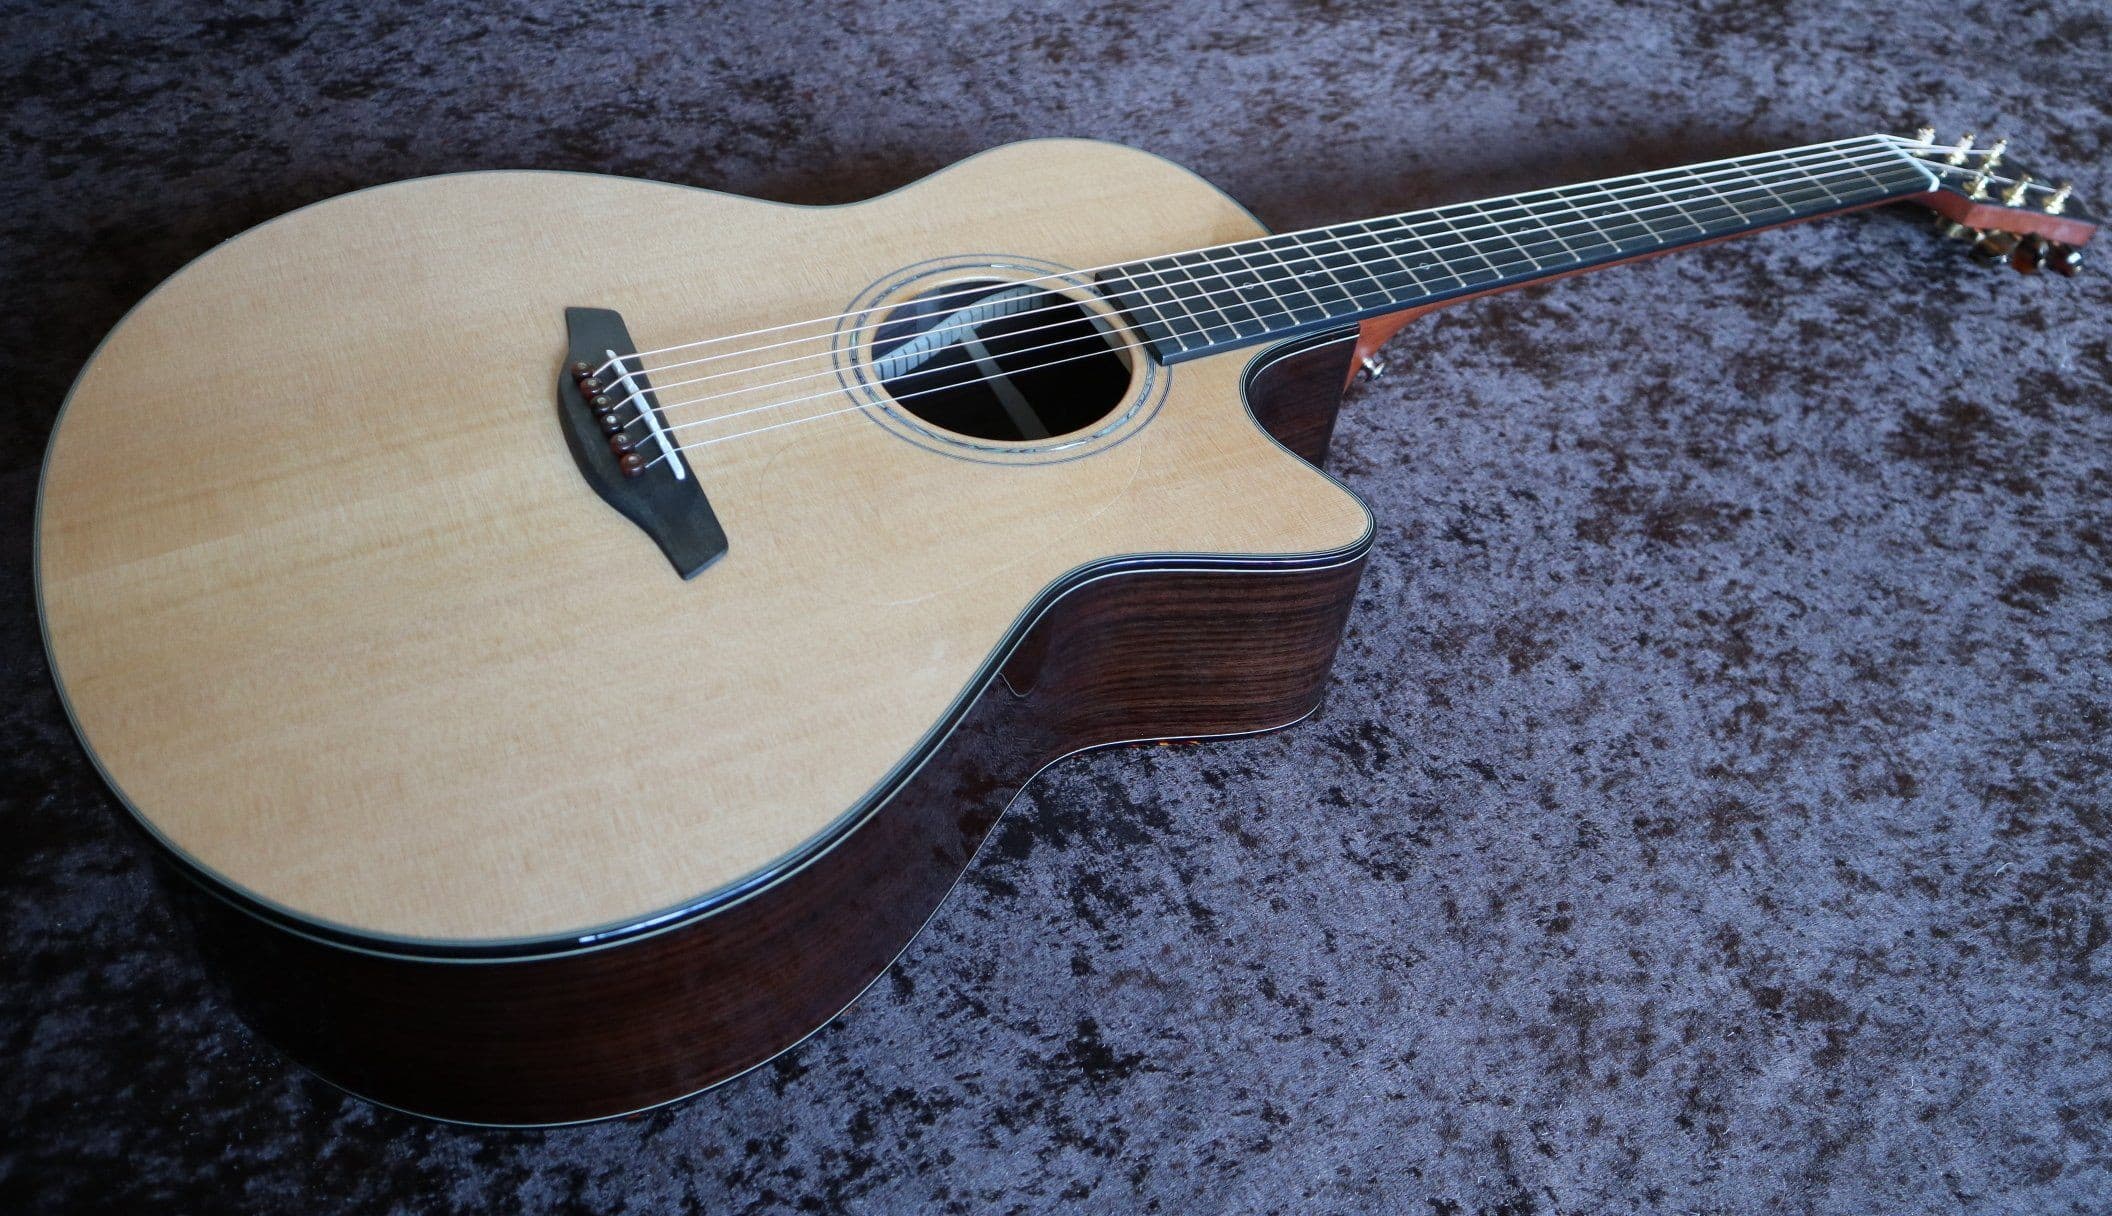 Furch Yellow Gc-CR Left Handed Acoustic Guitar Including UK Exclusive Inlays & Over £100 Of Added Value FREE, Acoustic Guitar for sale at Richards Guitars.